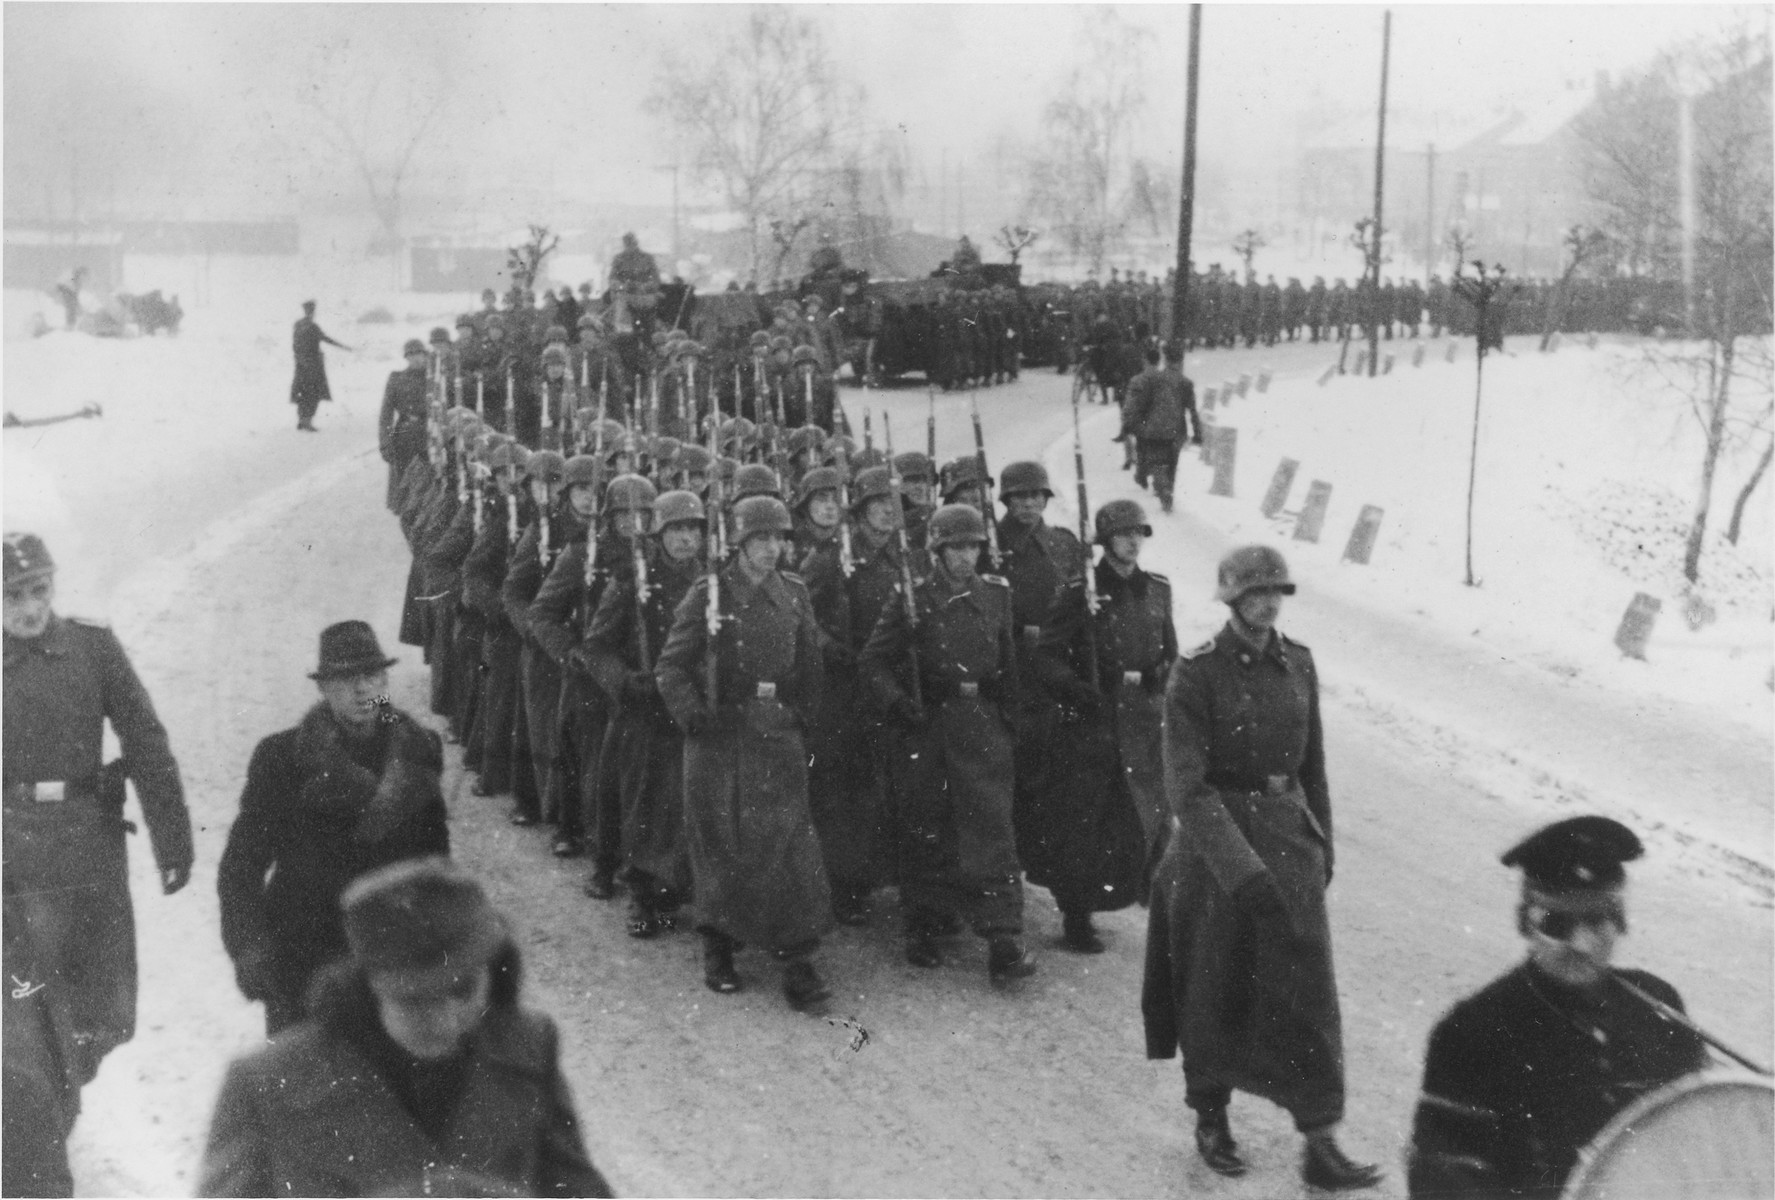 Germans troops in three long columns march along with rifles shouldered during a military funeral near Auschwitz.

The original caption reads "Beisetzung von SS Kameraden nach einem Terrorangriff."  (Burying our SS comrades from a terror attack.)

[This probably is the aftermath of the December 26 bombing based on the snow on the ground but it could also be September 13th bombing of IG Farben in which 15 SS men died in the SS residential blocks and 28 were seriously wounded.]